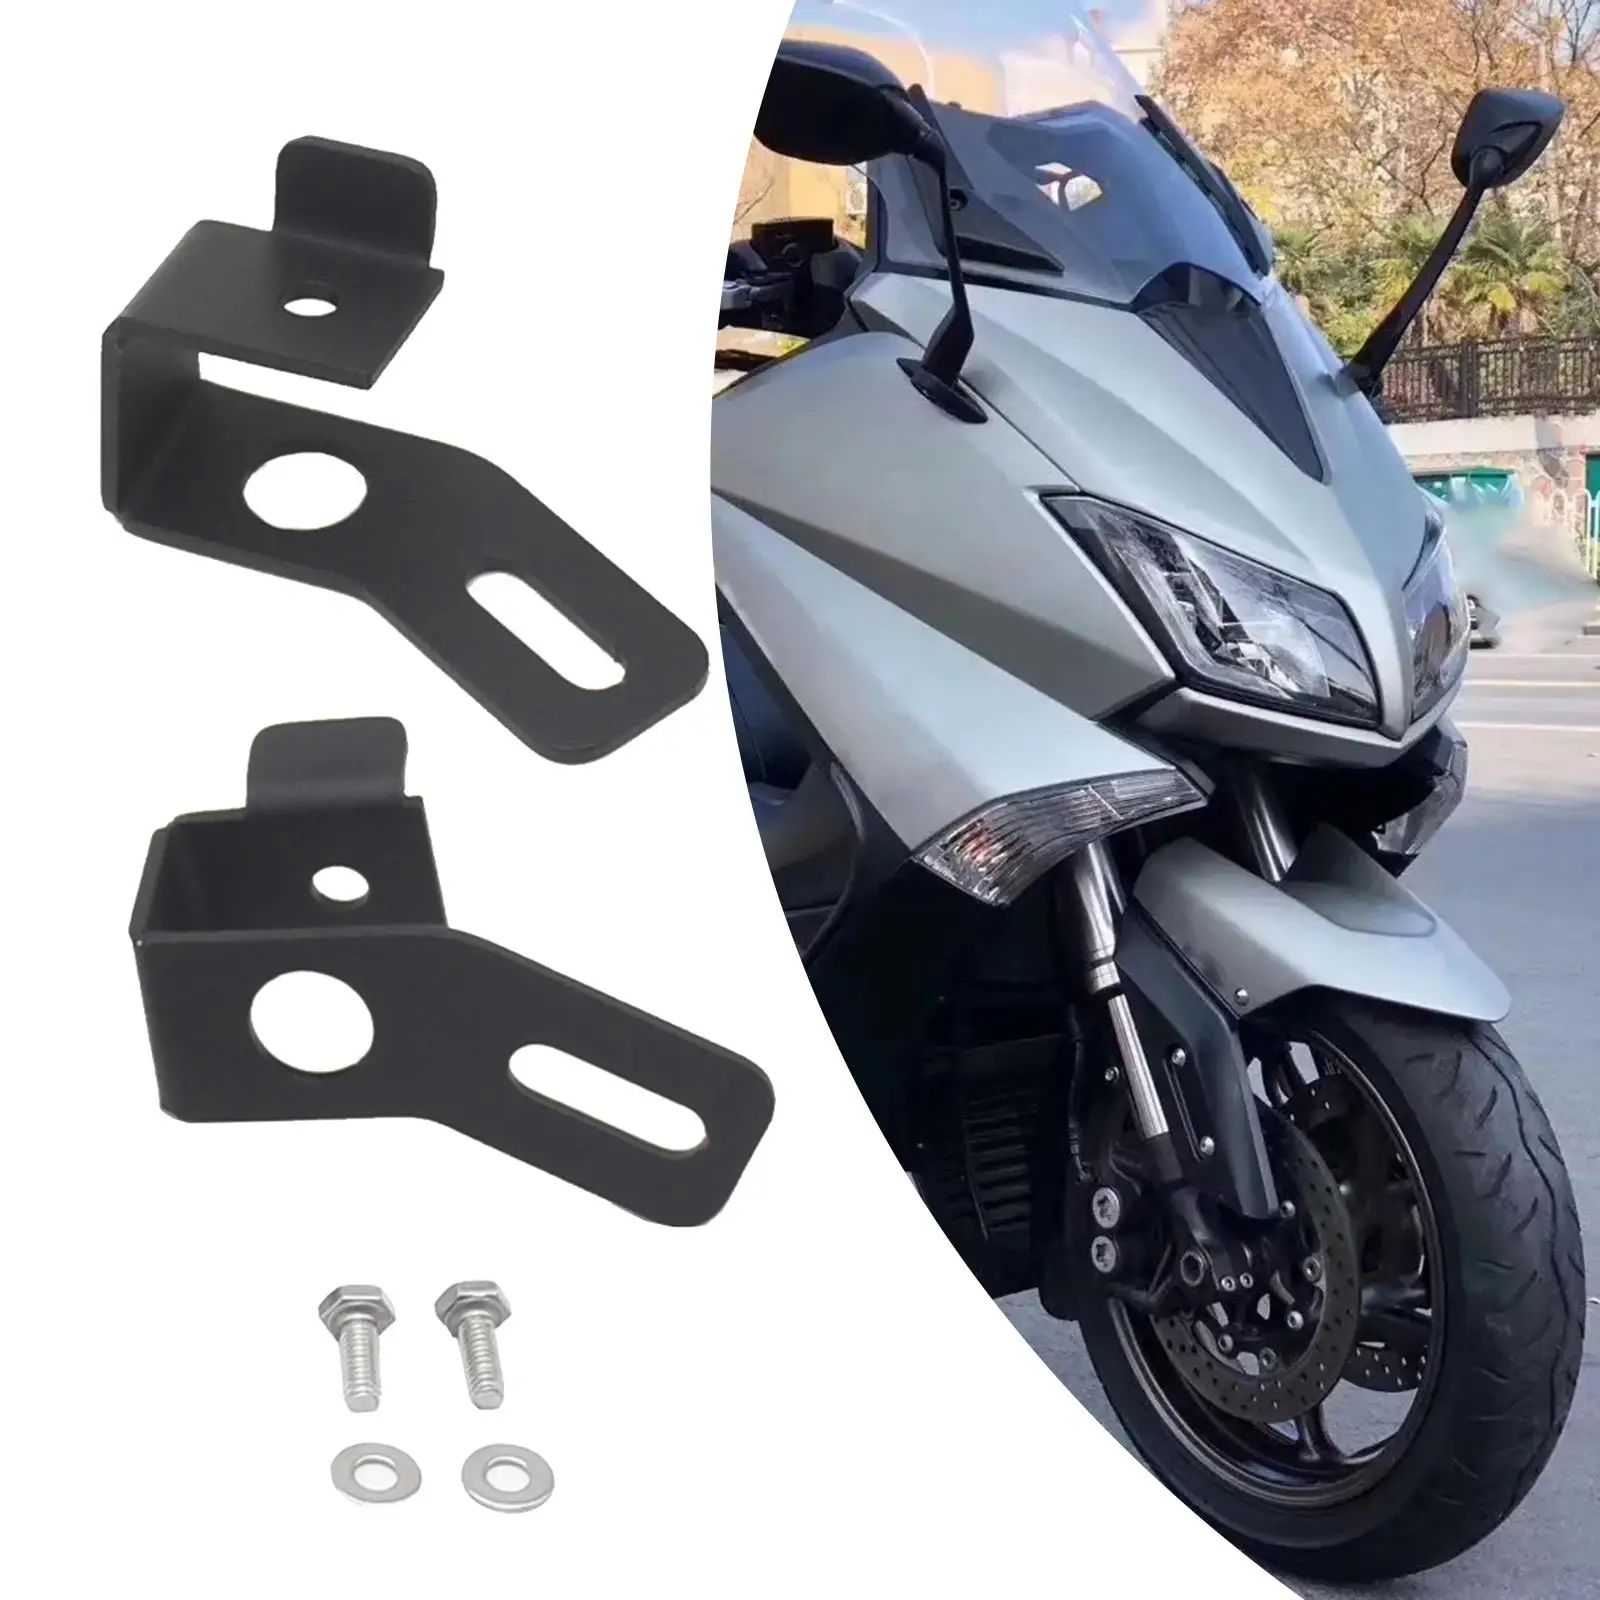 Fog Lamp Spot Lamp Auxiliary Support Easily Install Attachment Autobicycle Accessory for Yamaha Tmax 530 Tmax 560 2017-2021